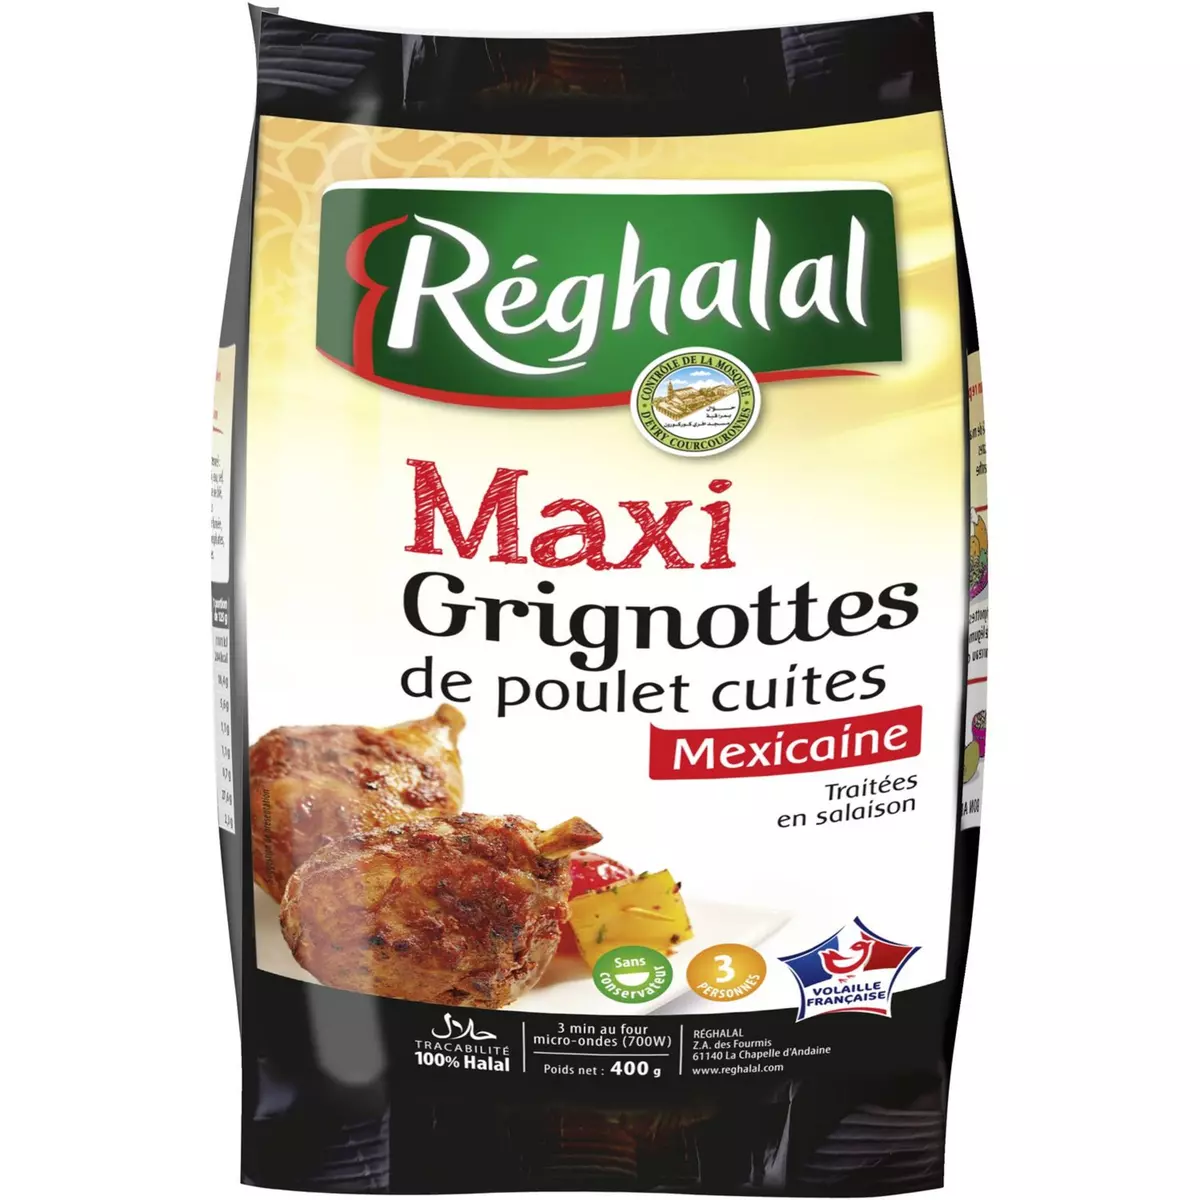 REGHALAL Maxi grignotte mexicaine halal 400g